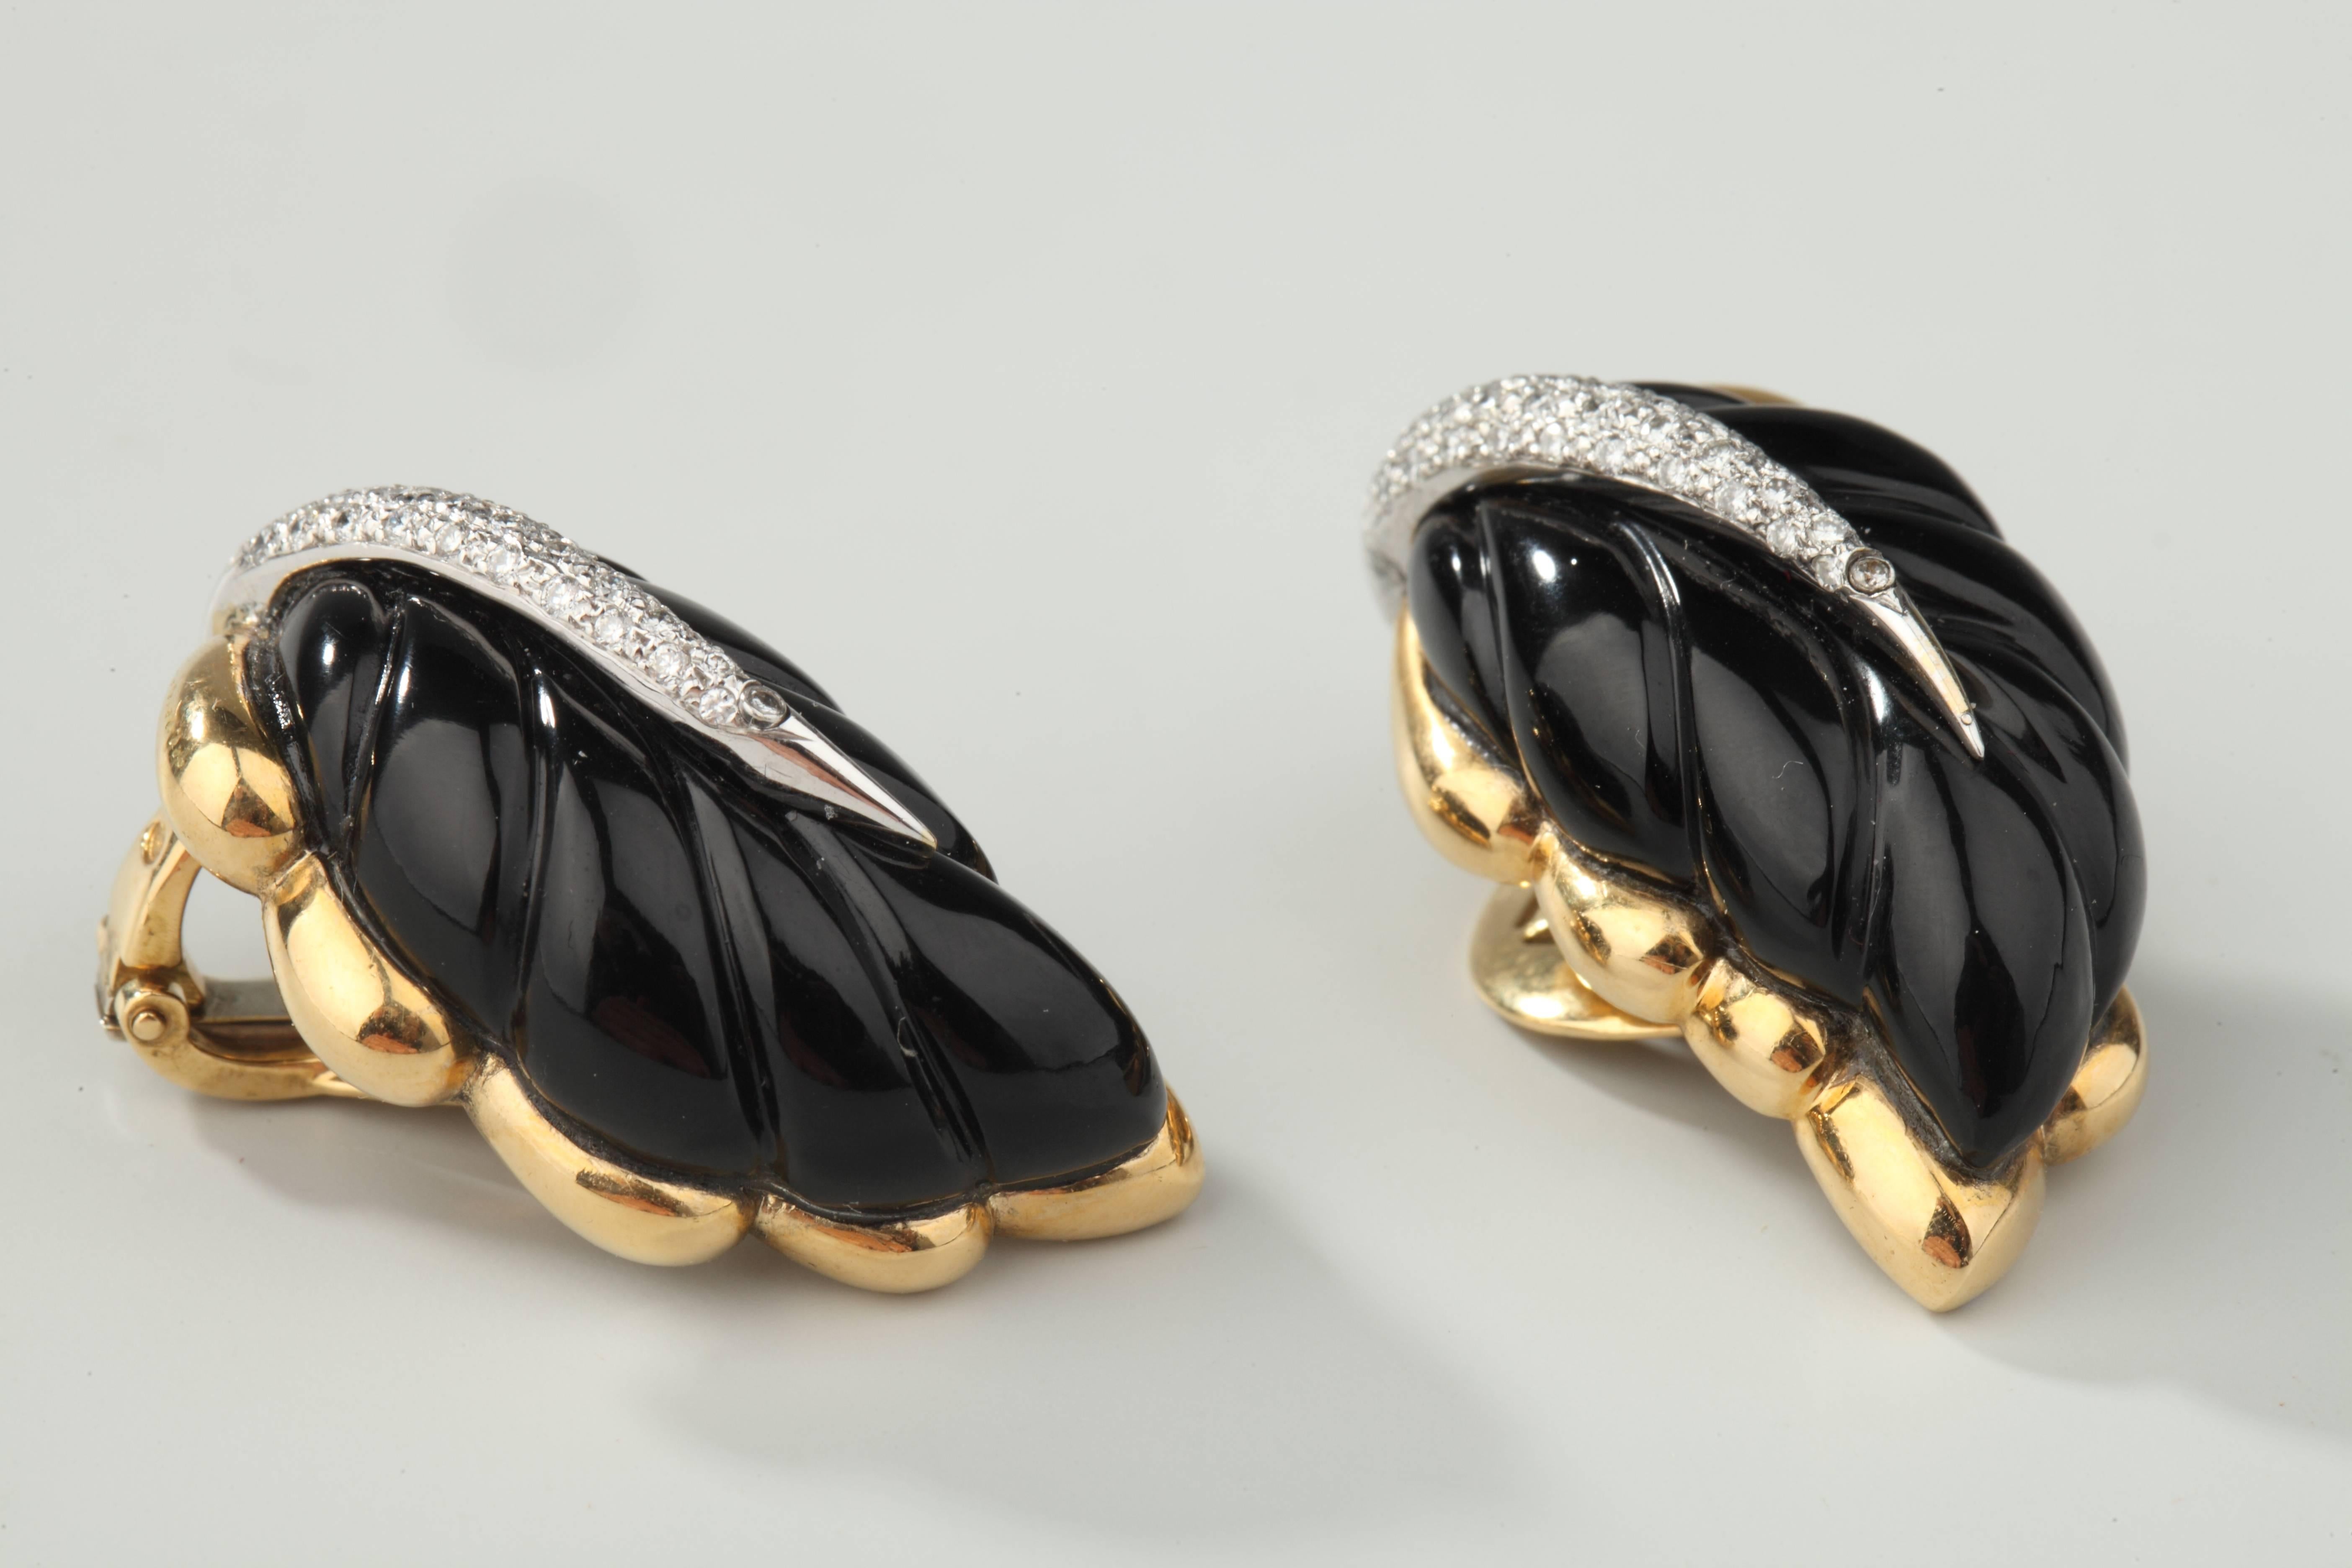 Designed as a leaf, in onyx, brillant-cut diamonds (0.74ct) mounted on 18k yellow gold.
Signed Eva Segoura.